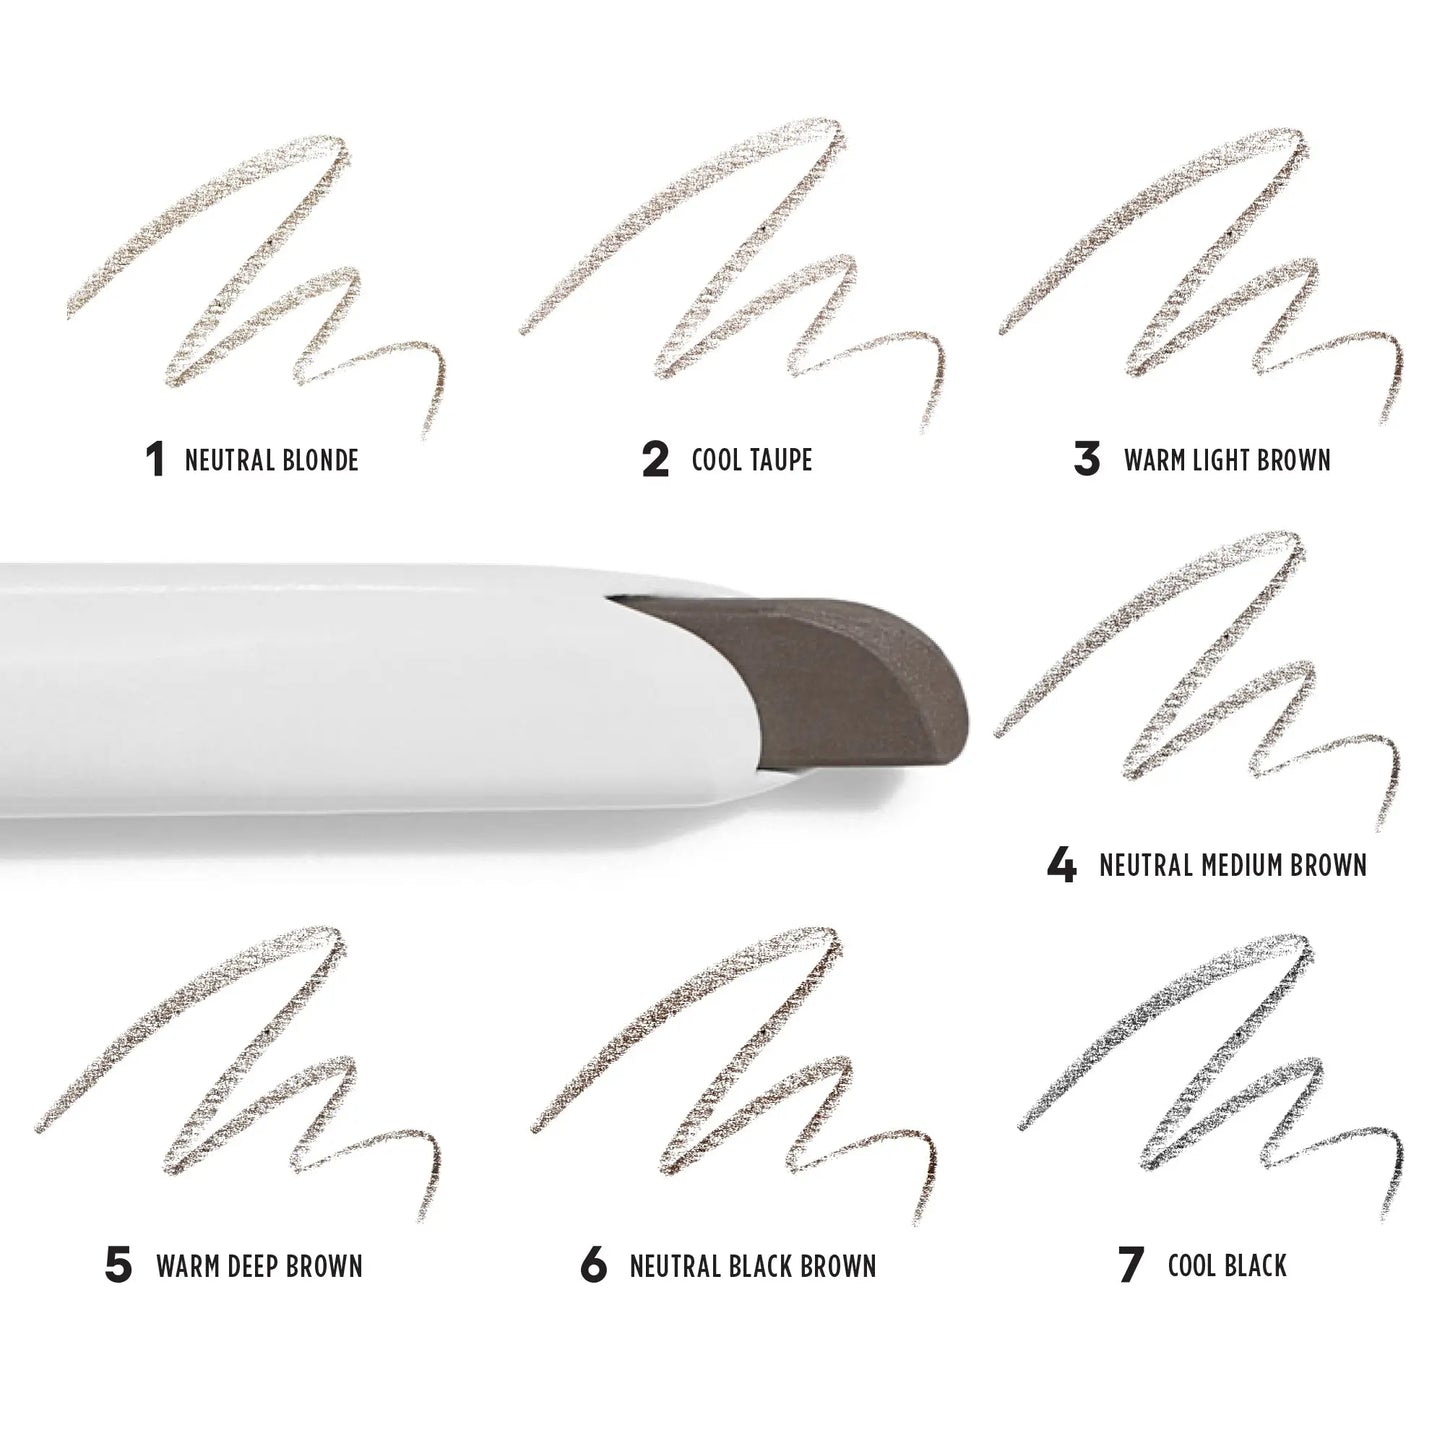 GXVE 2 - Instant Definition Sculpting Eyebrow Pencil For Bold Brows